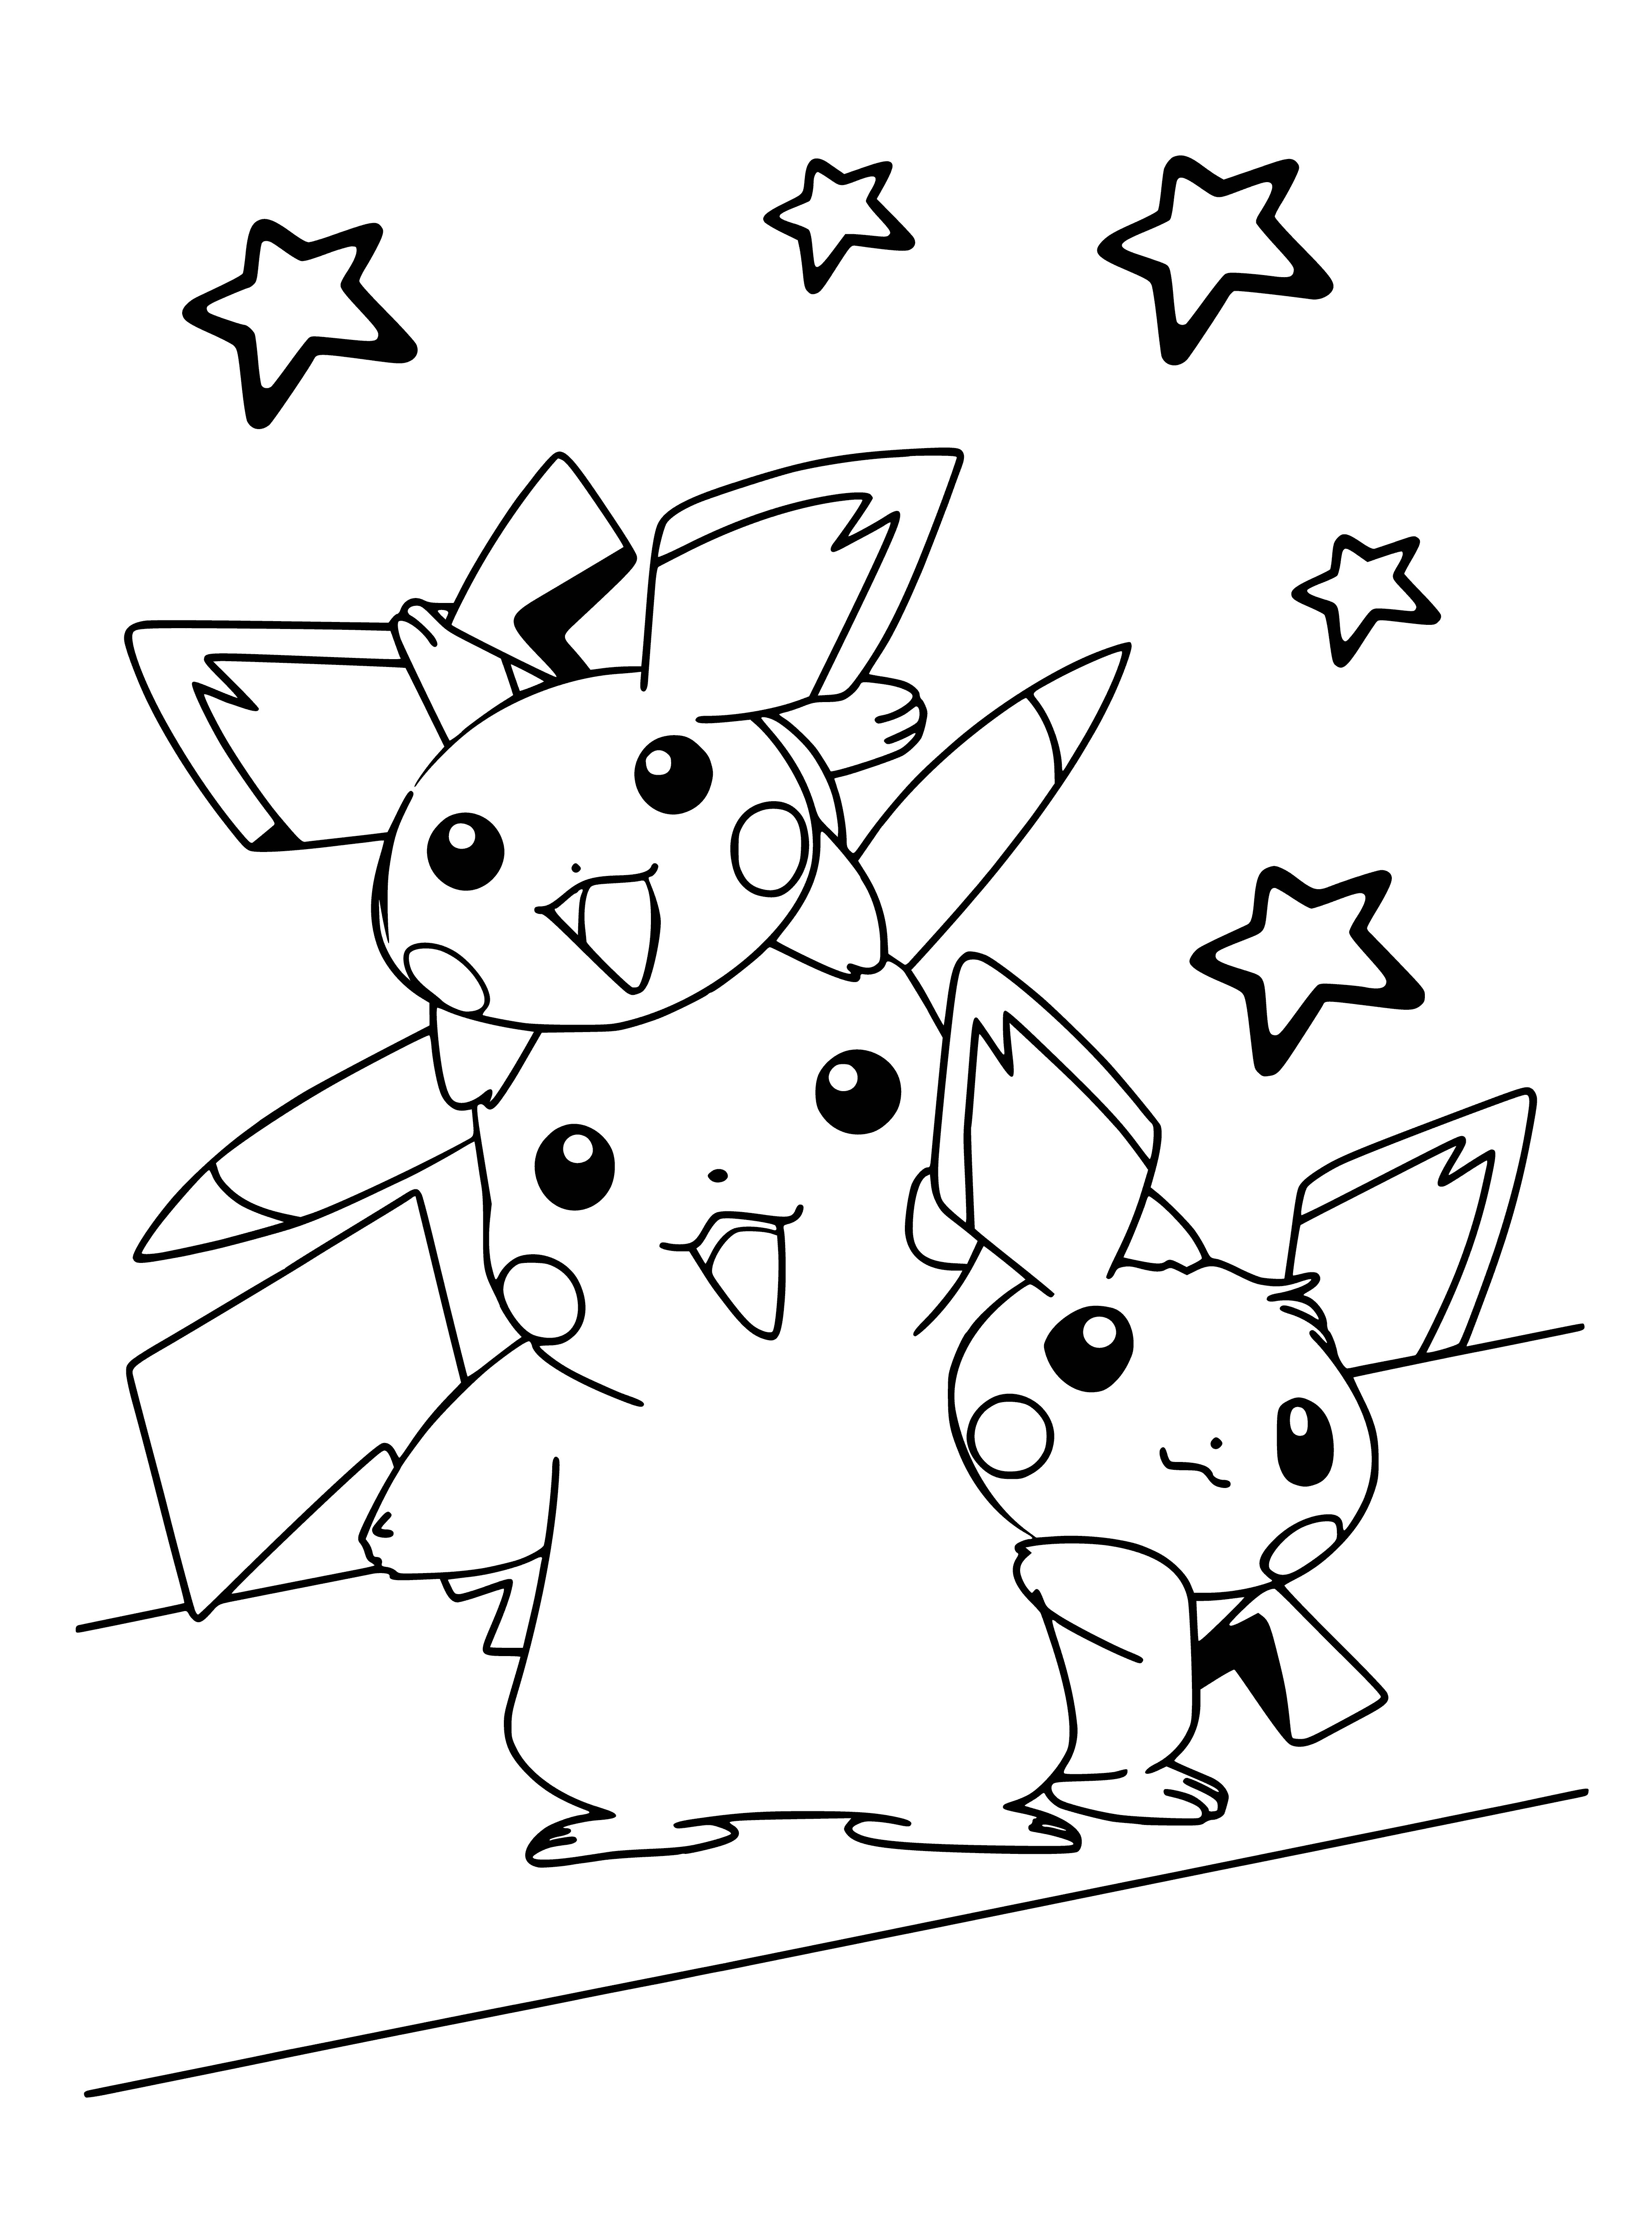 coloring page: Pikachu is a small, yellow, rodent-like Pokemon with red cheeks, capable of generating electricity.